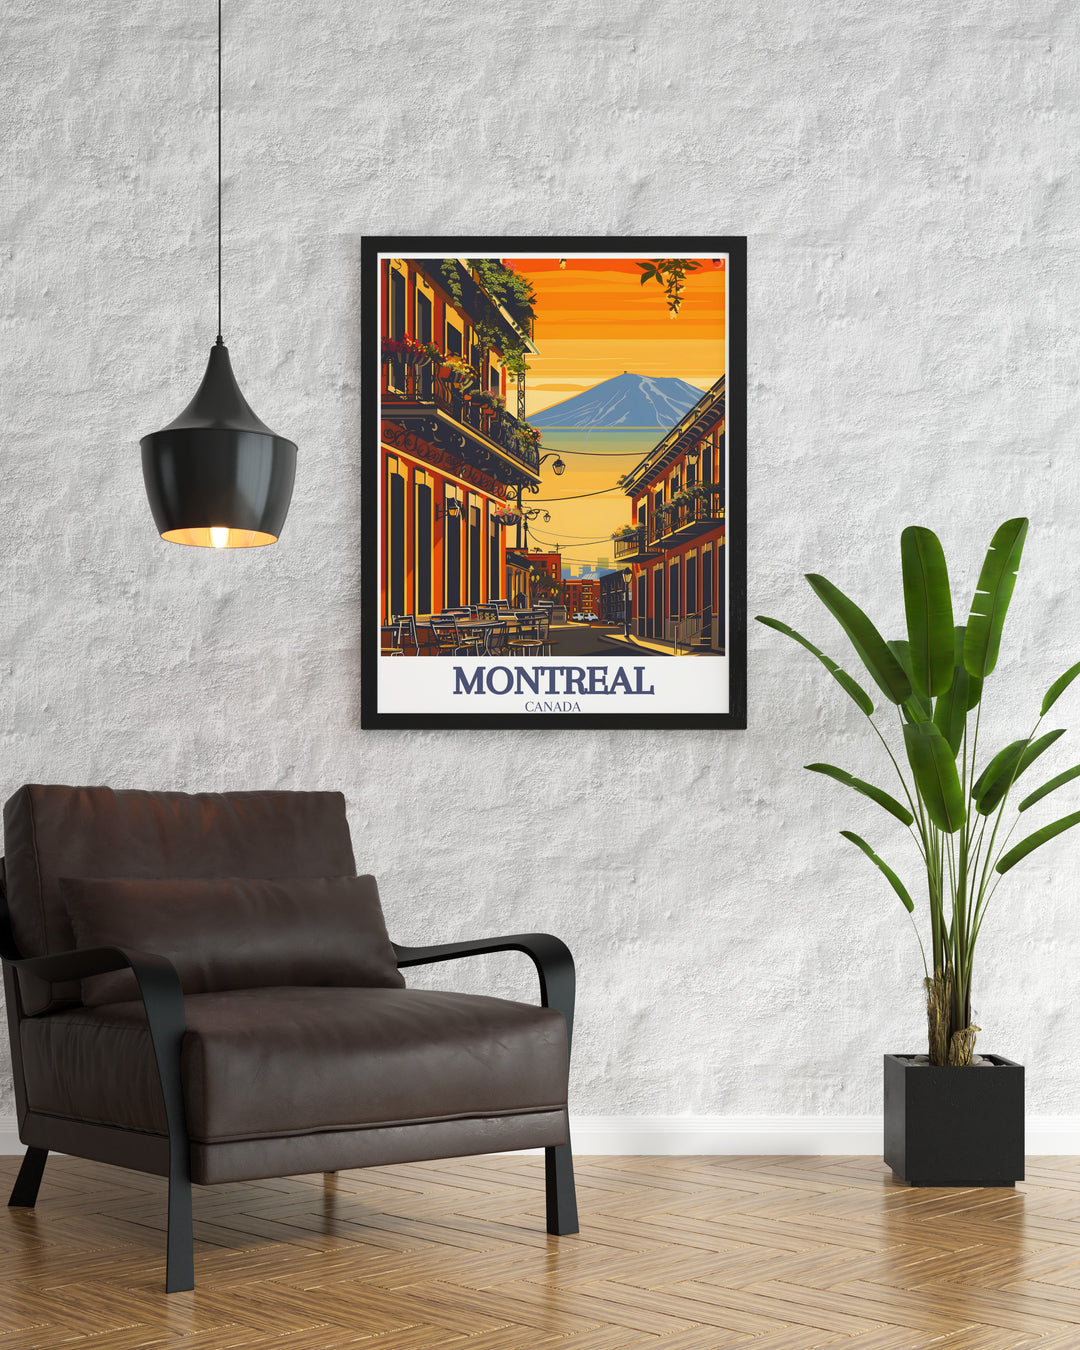 Montreal decor featuring Rue Crescent and Mount Royal beautifully depicted in a high quality print ideal for adding elegance to your living space perfect for fans of Montreals lively streets and tranquil parks.